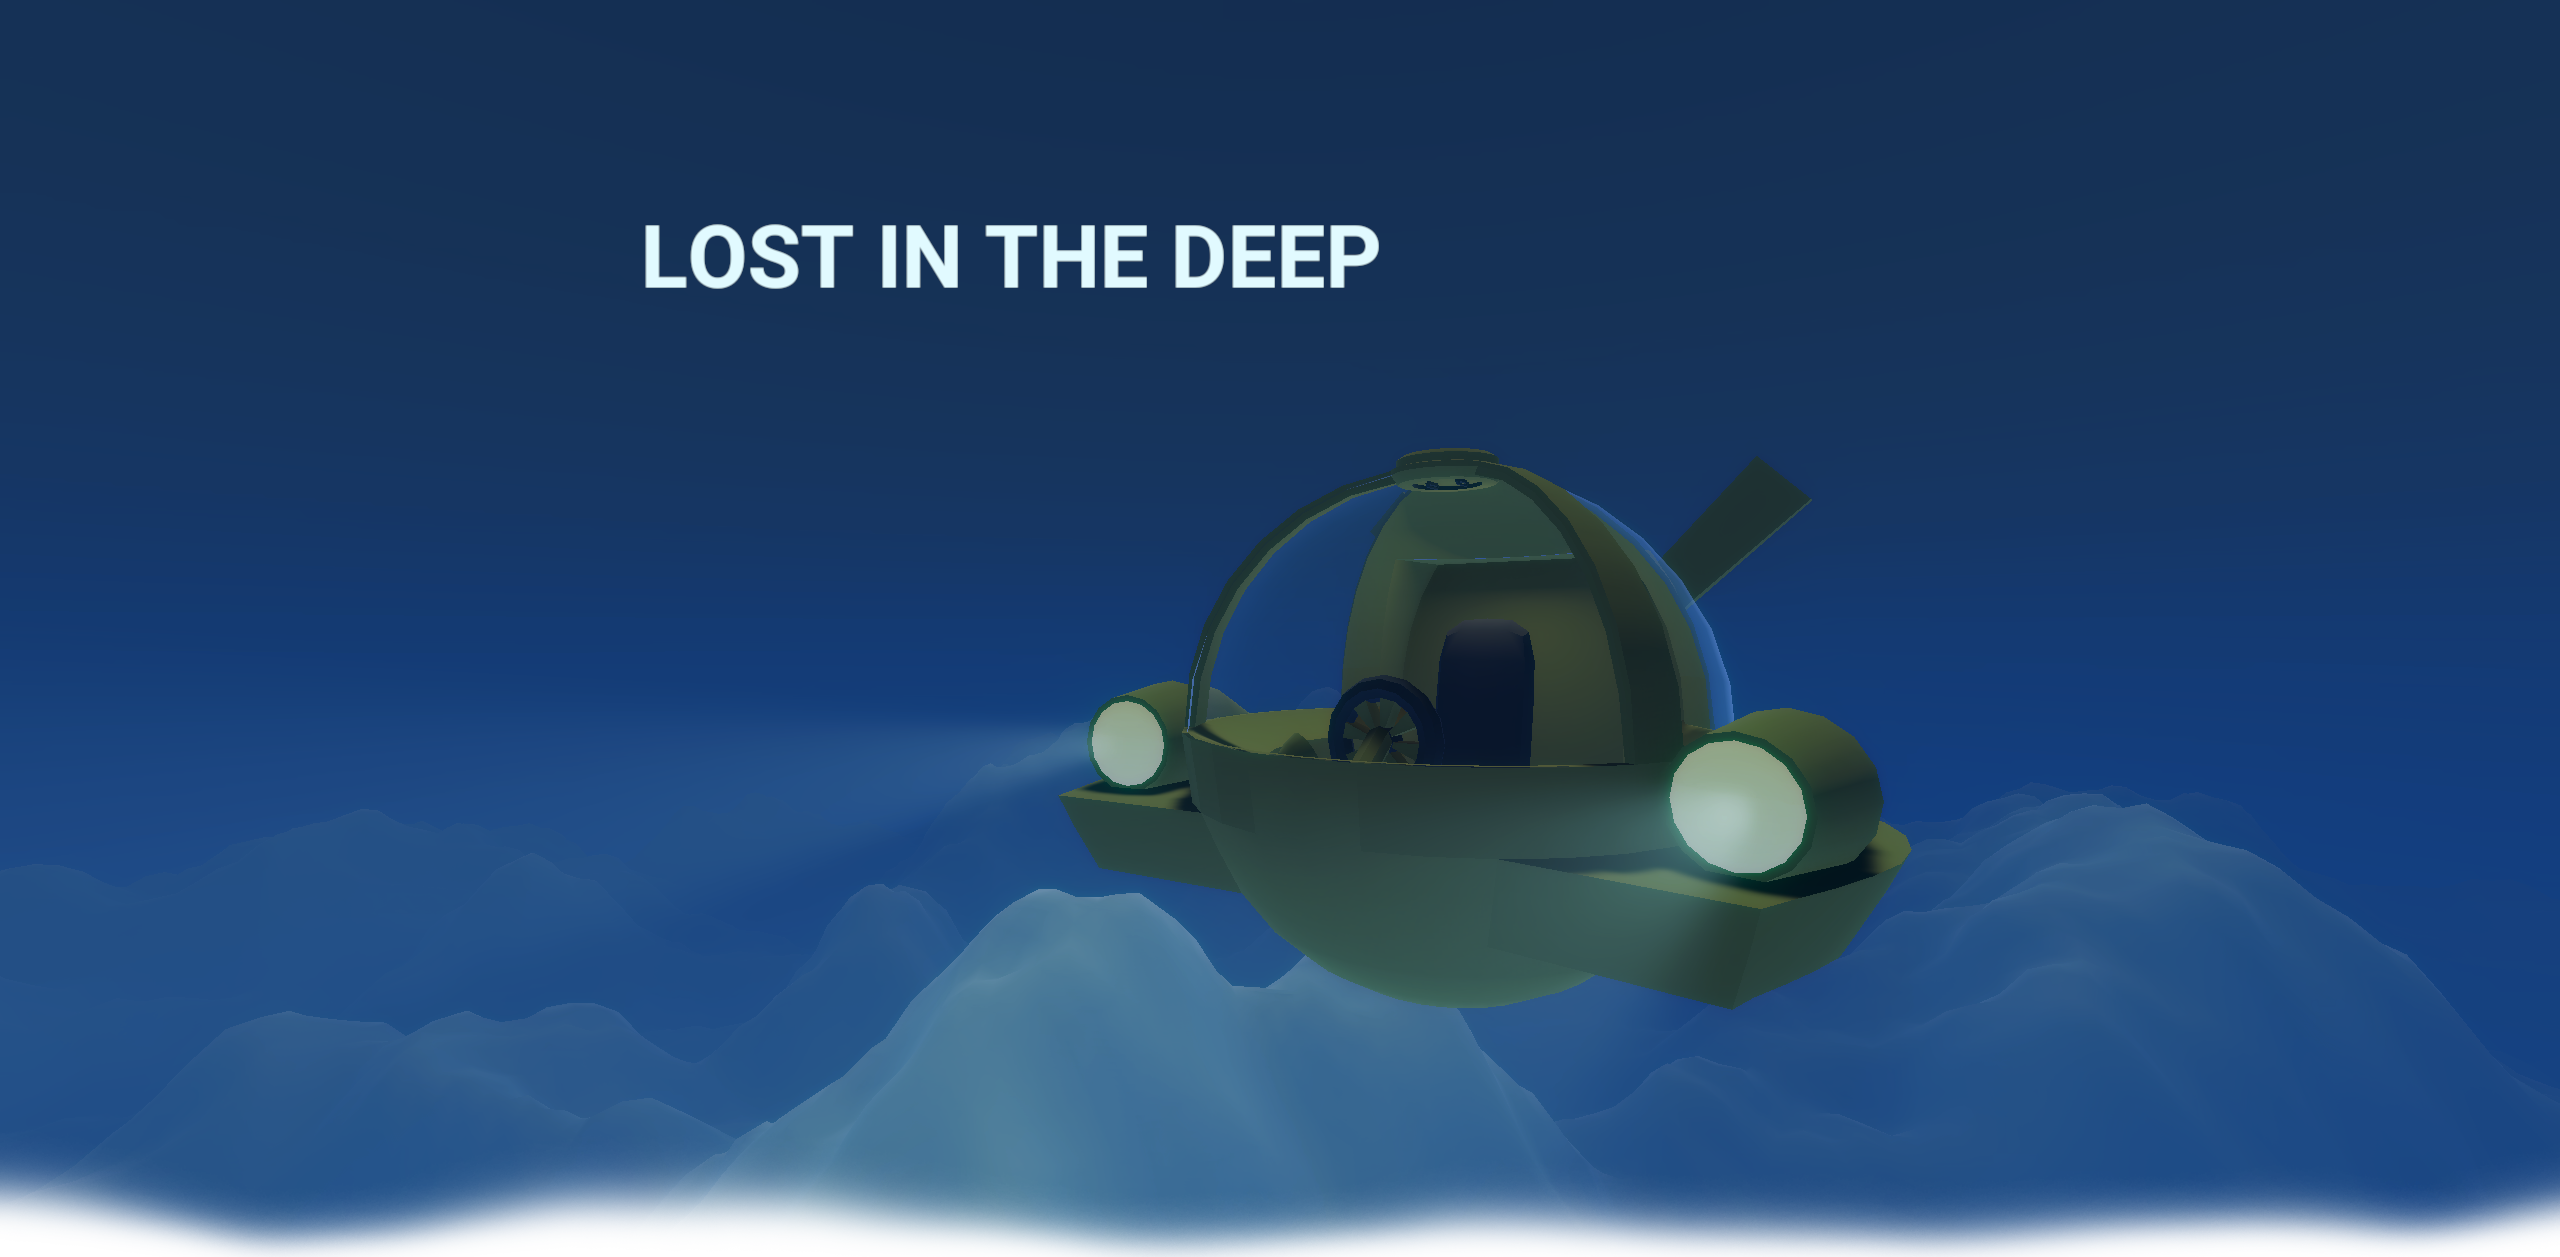 Lost in the deep